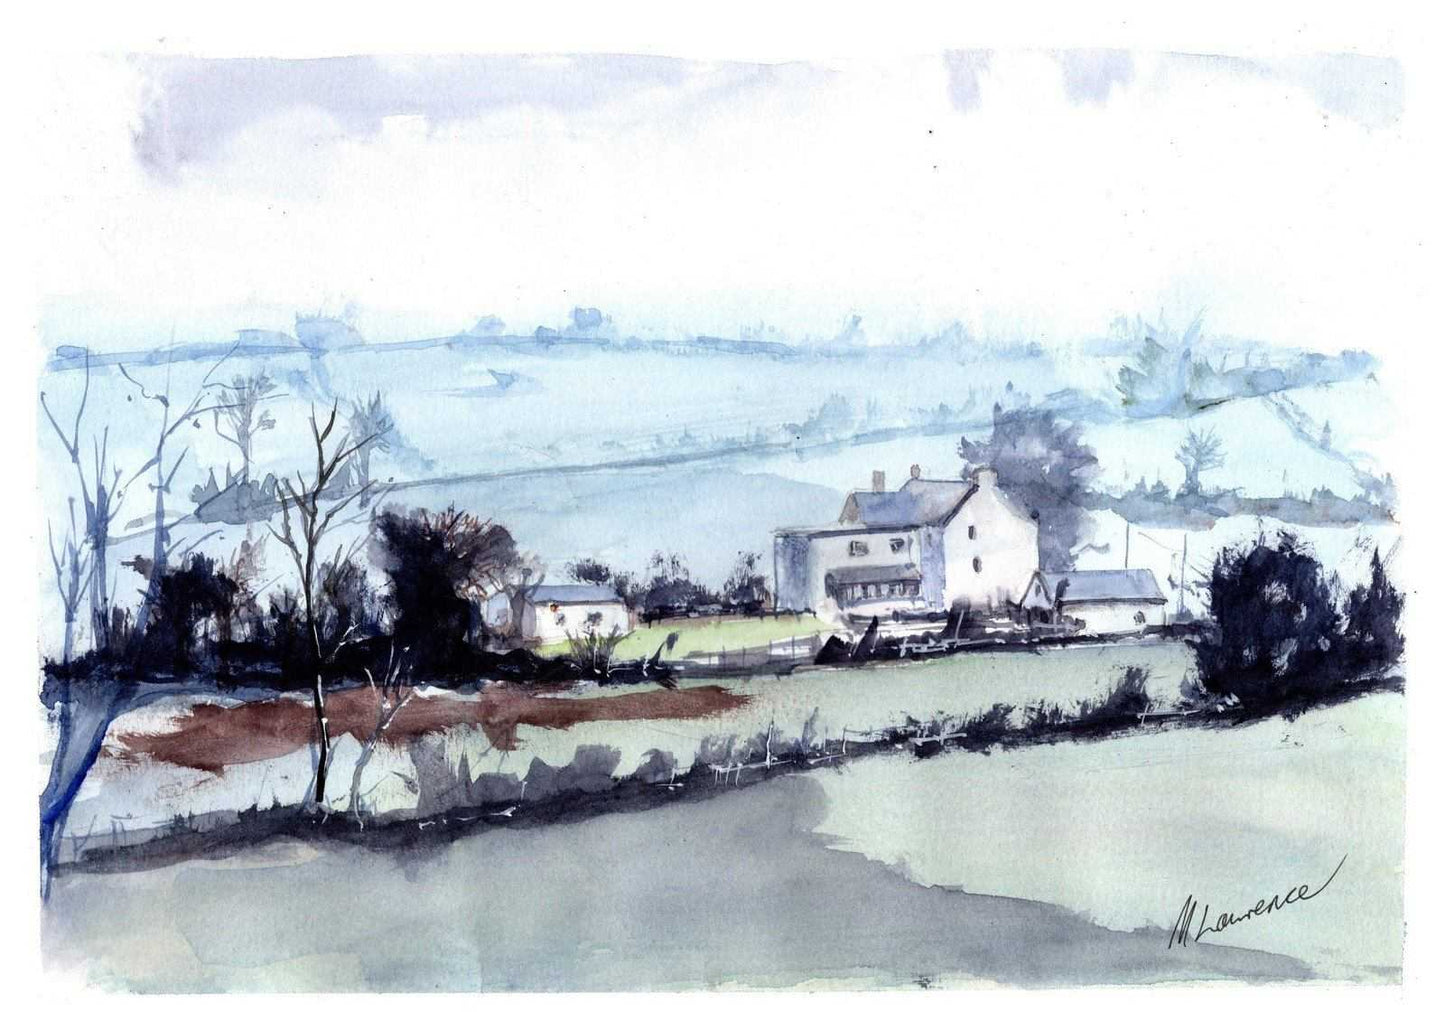 Welsh farm Painting landscape Cardiganshire scene Numbered limited edition Giclee Print of a Watercolour Painting ArtbyMyleslaurence